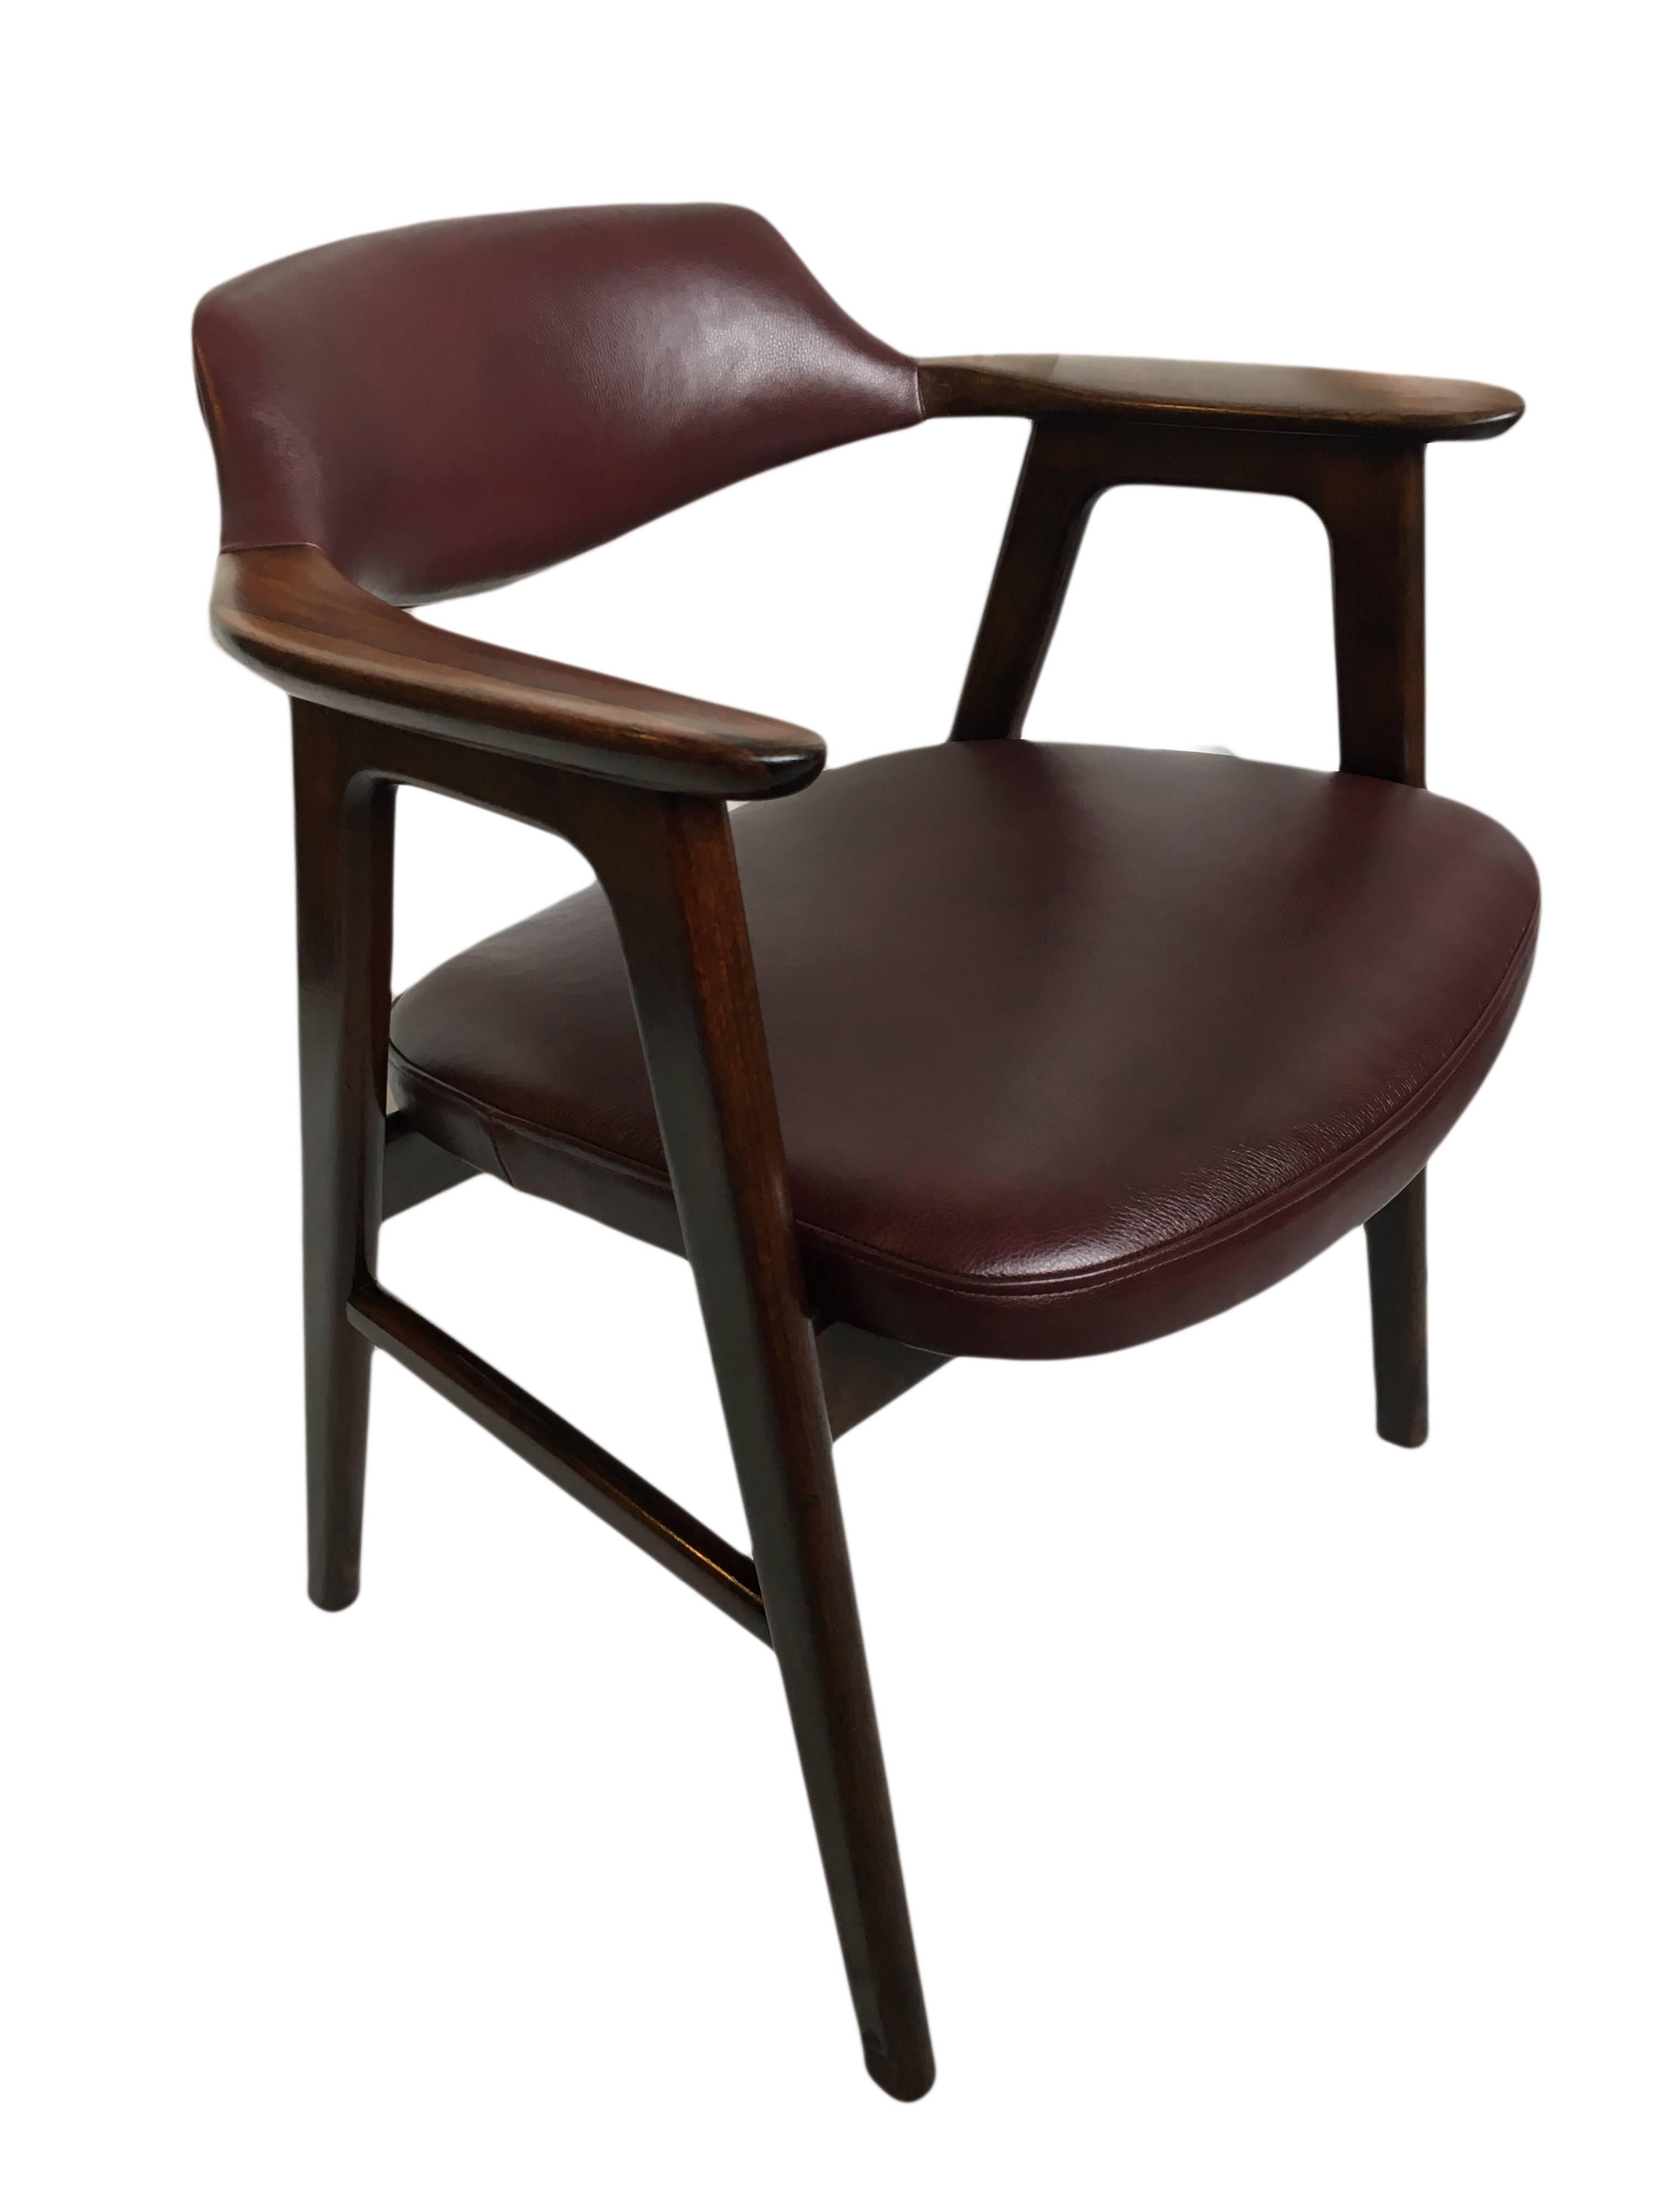 Erik Kirkegaard Rosewood and New Leather Chair 2